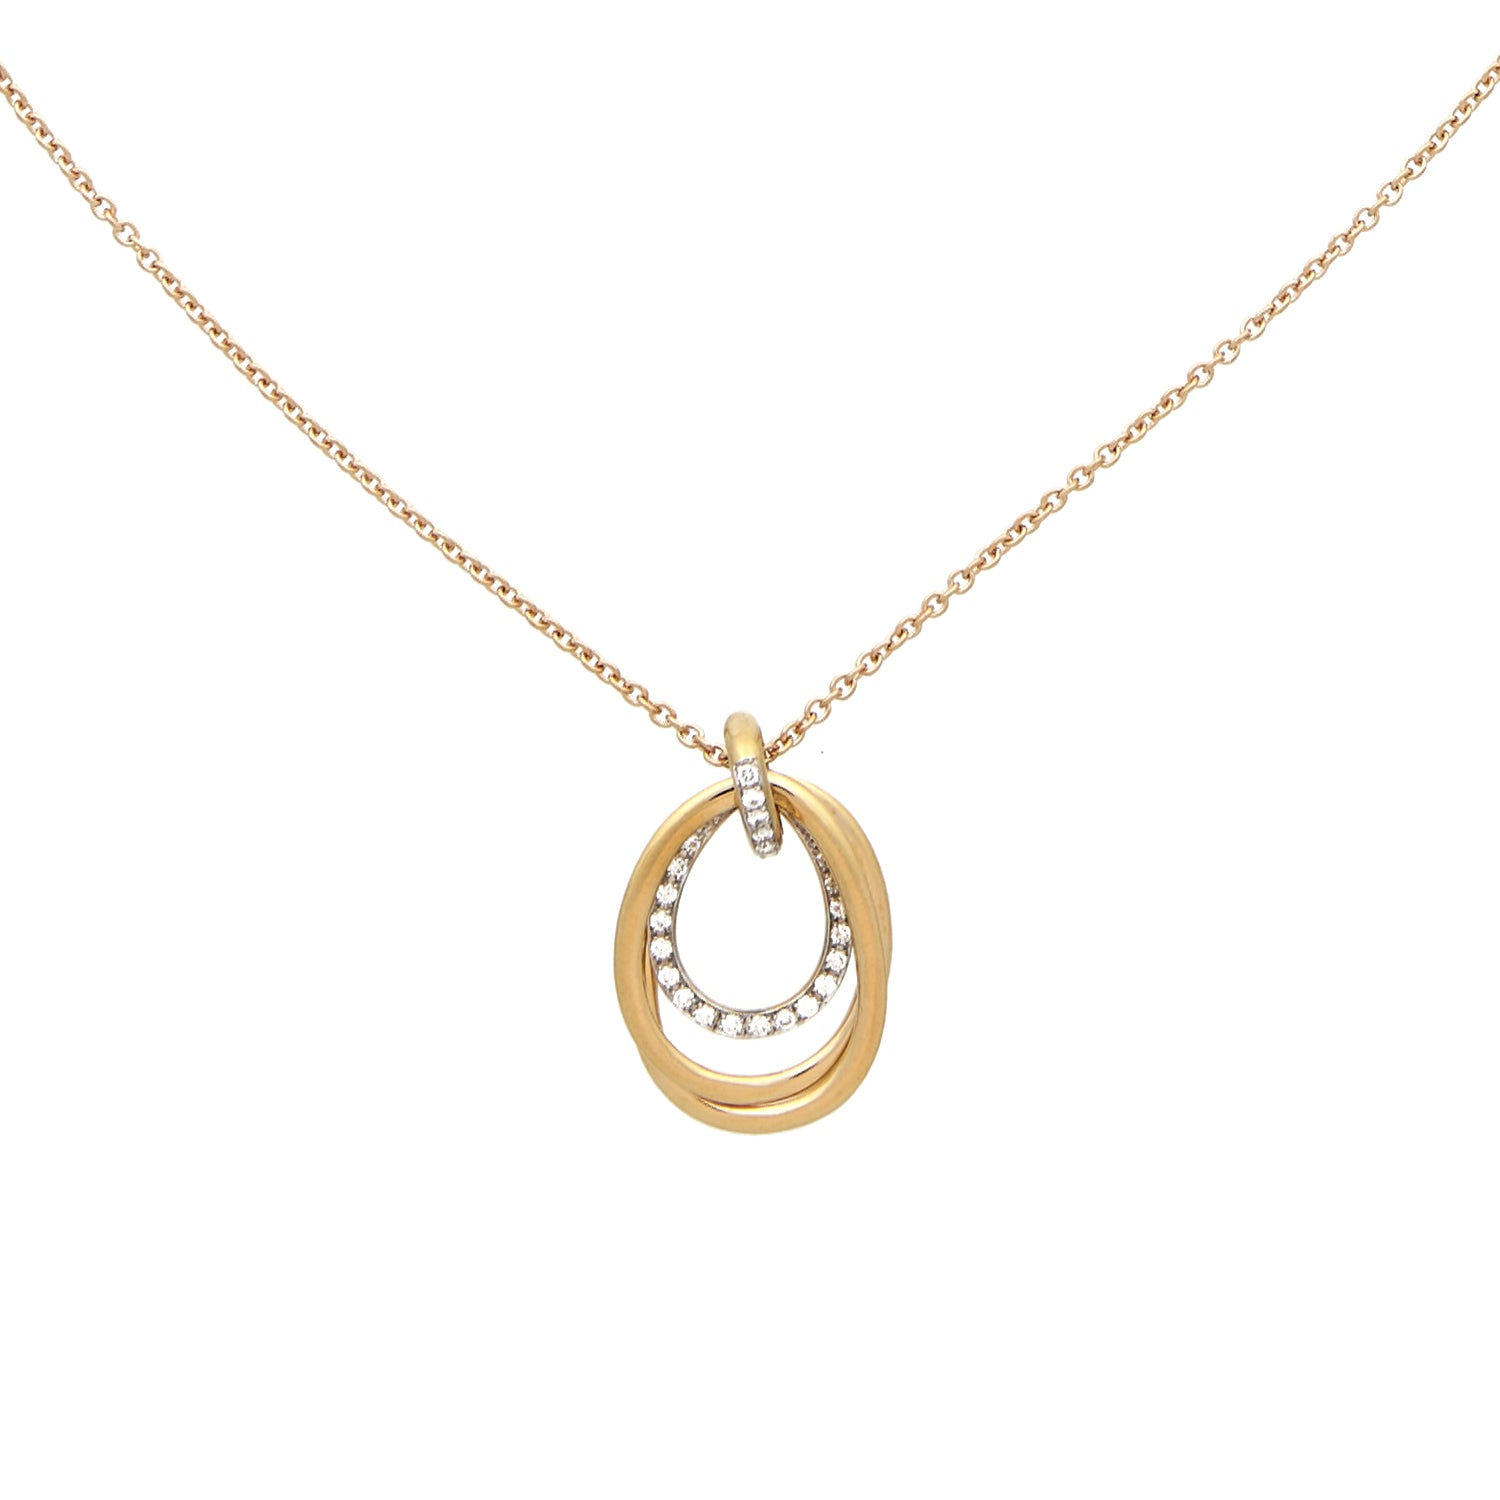 Rose gold necklace with diamond pendant